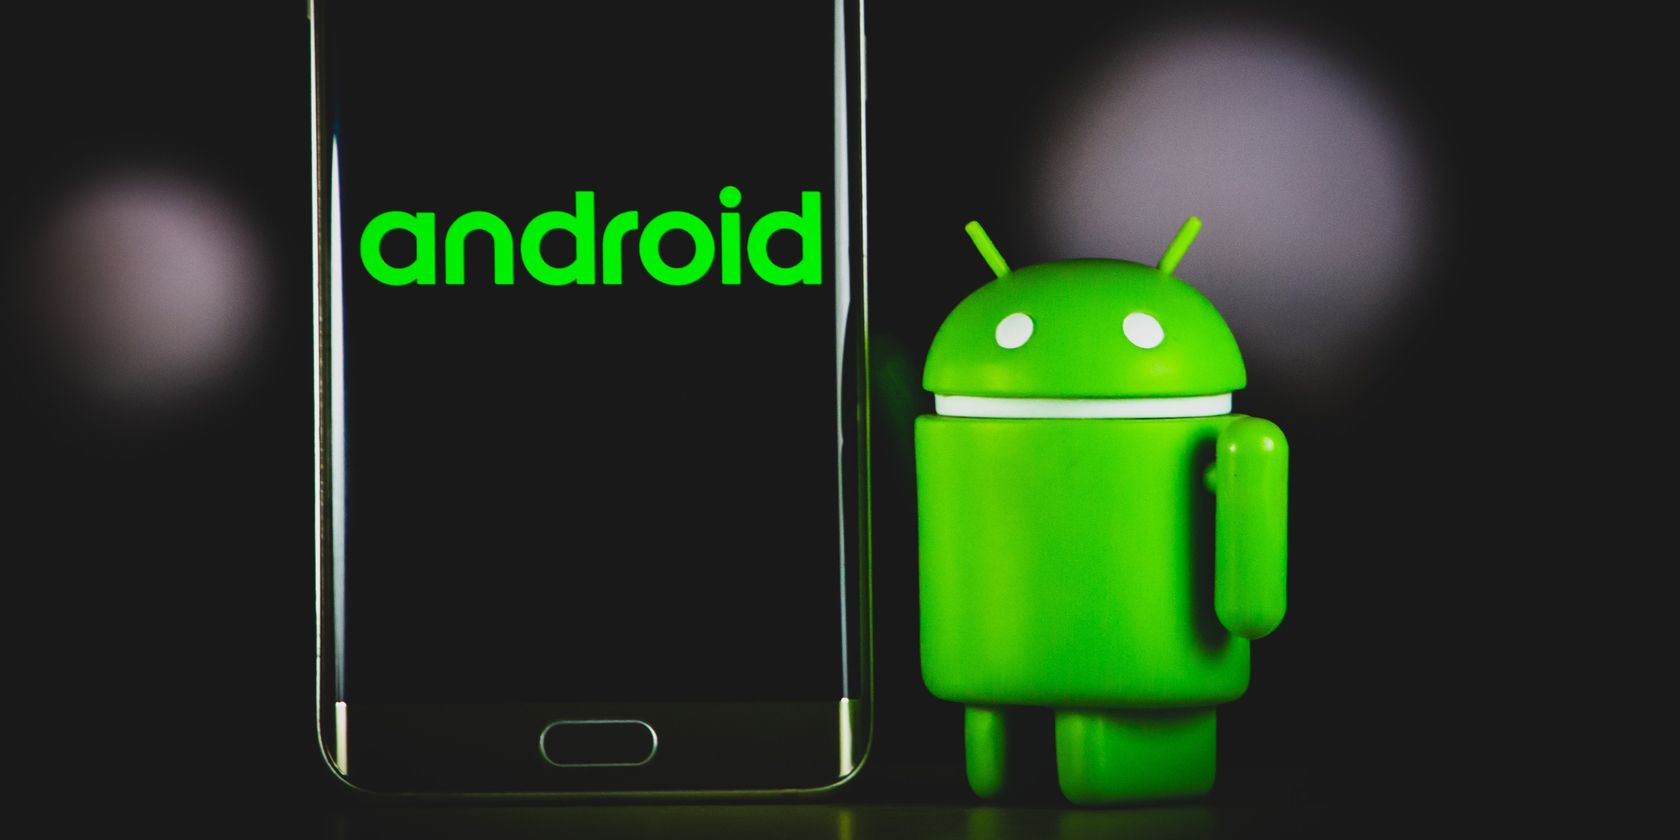 An Android Standing Next to a Smartphone Screen Displaying android text